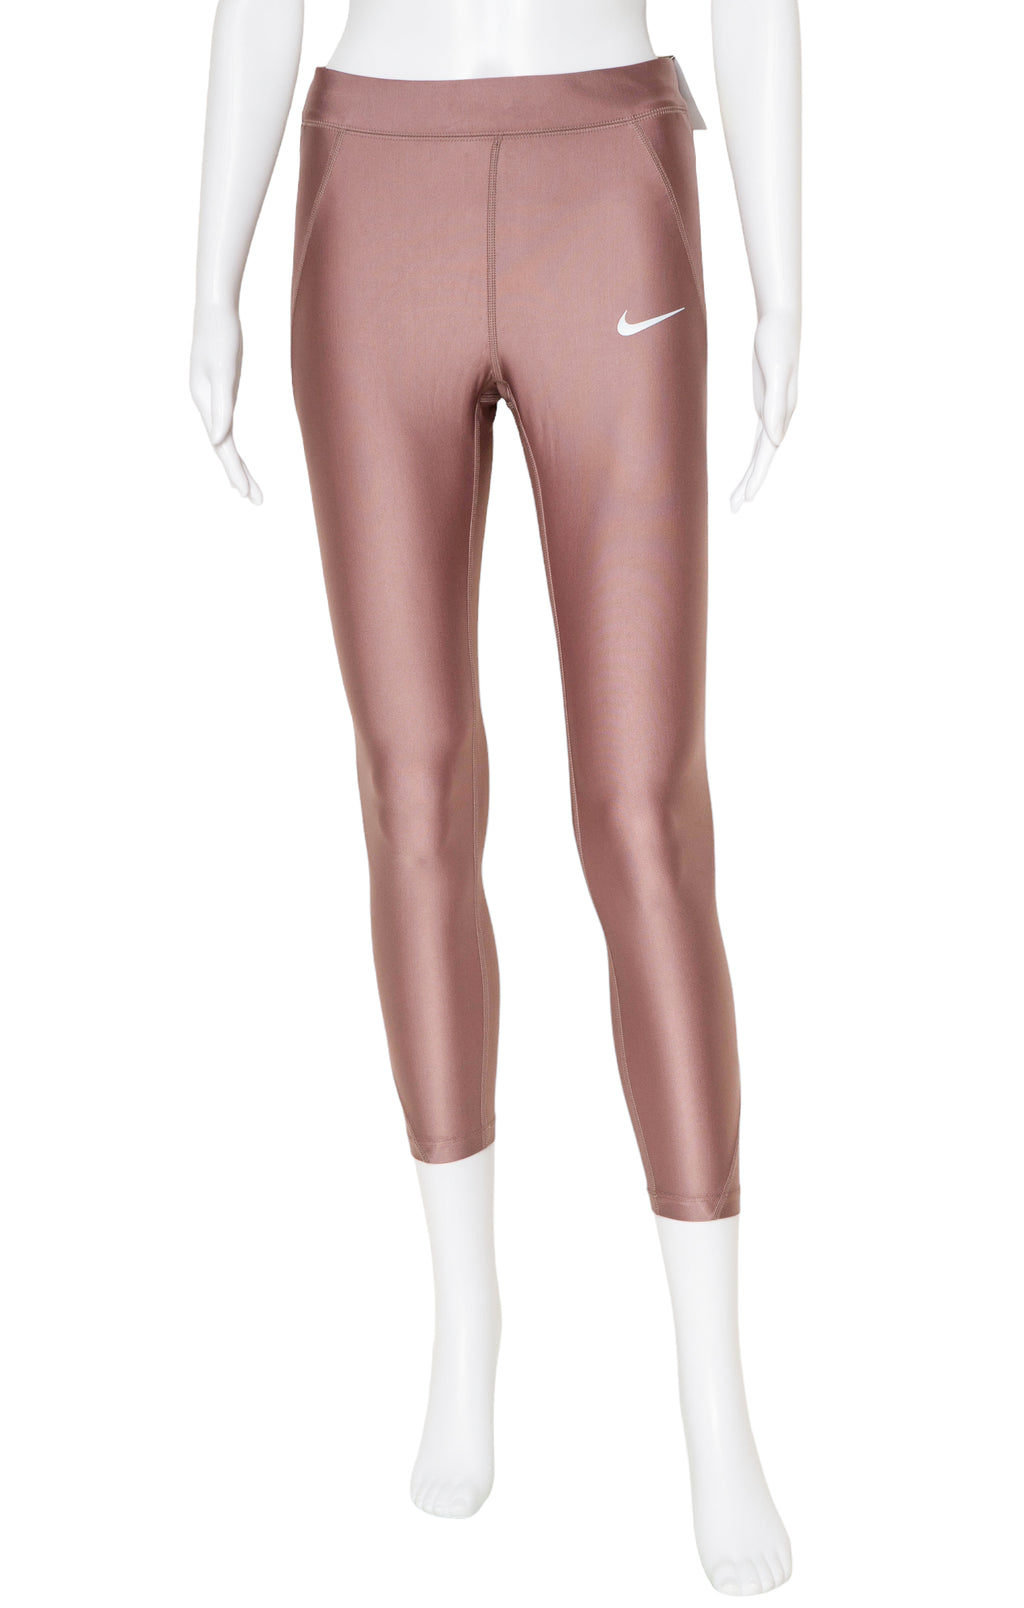 NIKE (NEW) with tags Leggings Size: M